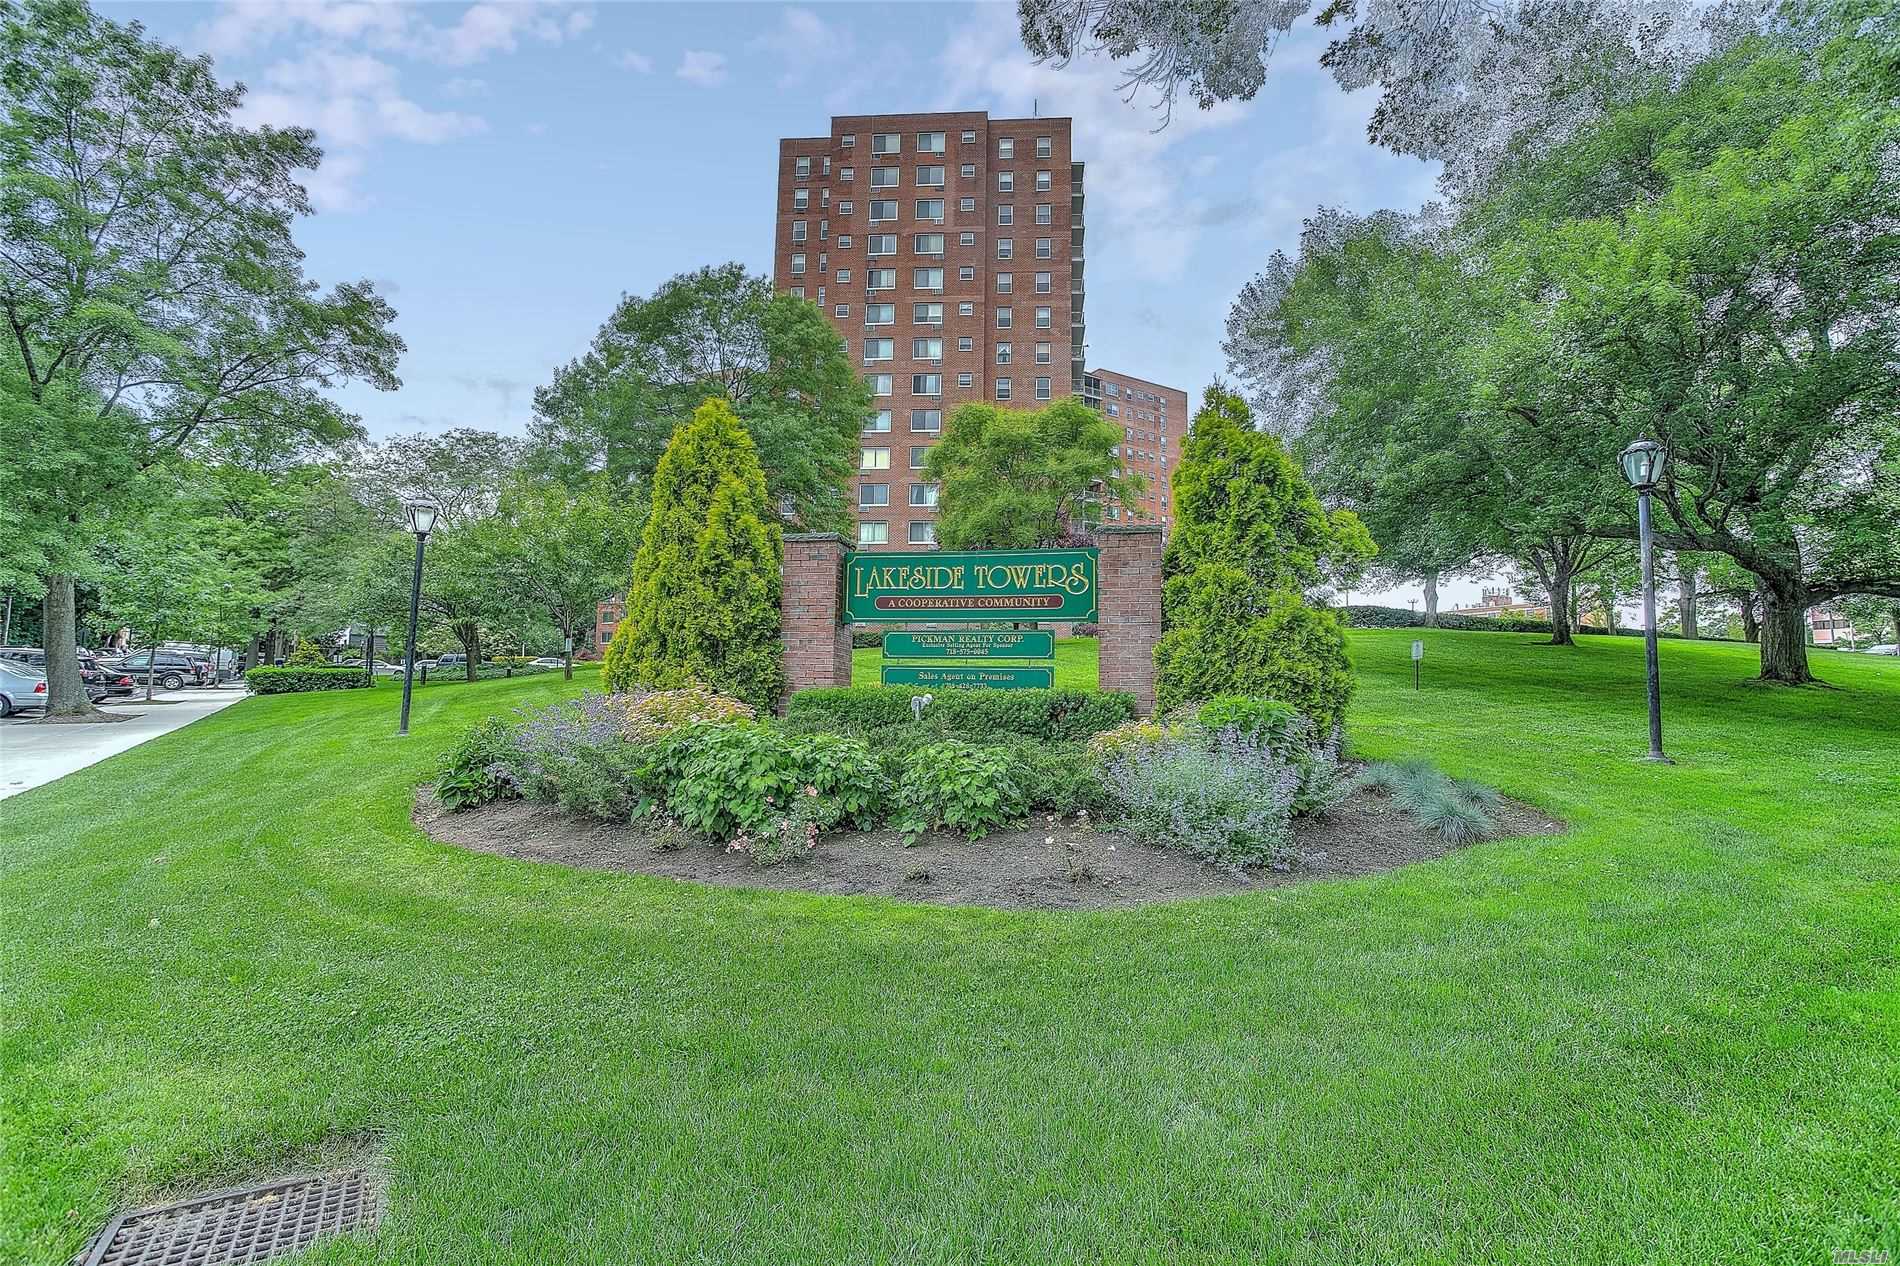 Live the Good Life-21 hour doorman, on site gym/summer pool and parking make this renovated 1 bedroom a must see! Super low maintenance includes all utilities. Enjoy your large terrace on the 15th floor which affords panoramic views. Walk and enjoy the serenity and beauty of Oakland Lake. E-Z access to major highways and minutes to the LIRR. A must see!